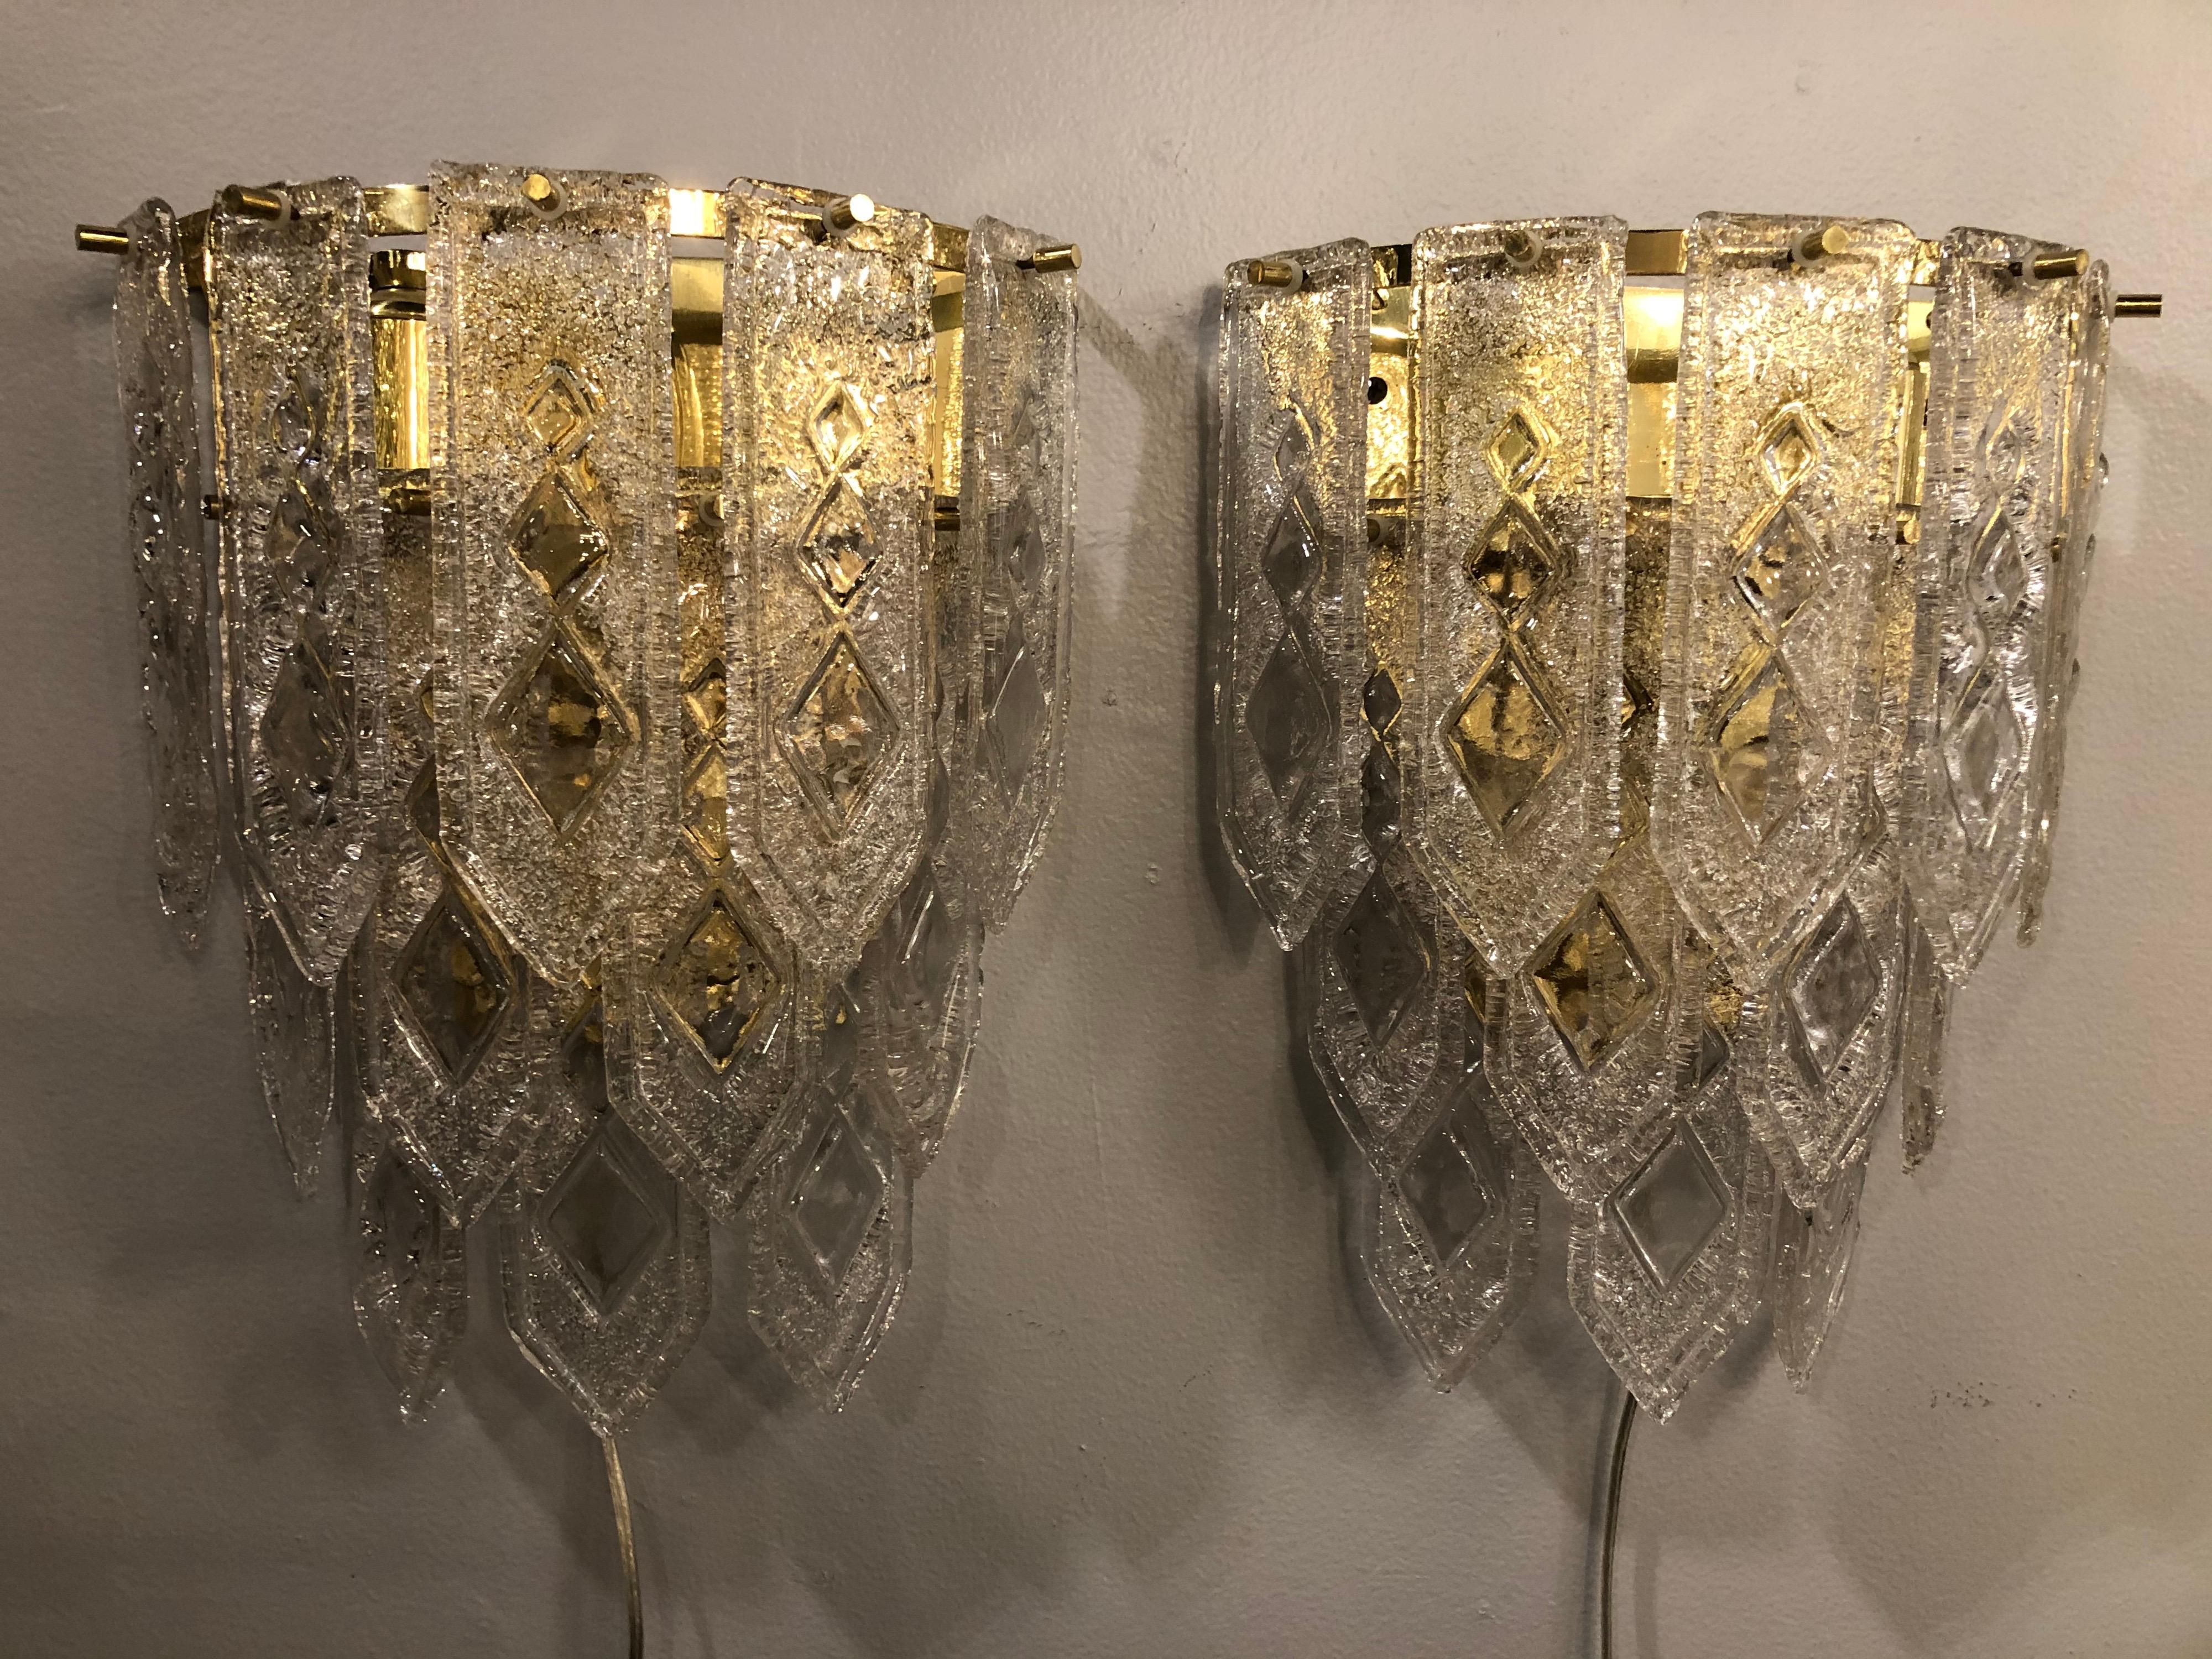 Pair of three-tier Venini Art Deco style sconces. Crystals have great geometric pattern on brass frame. Three bulbs each. Very good quality and condition, ready to use.